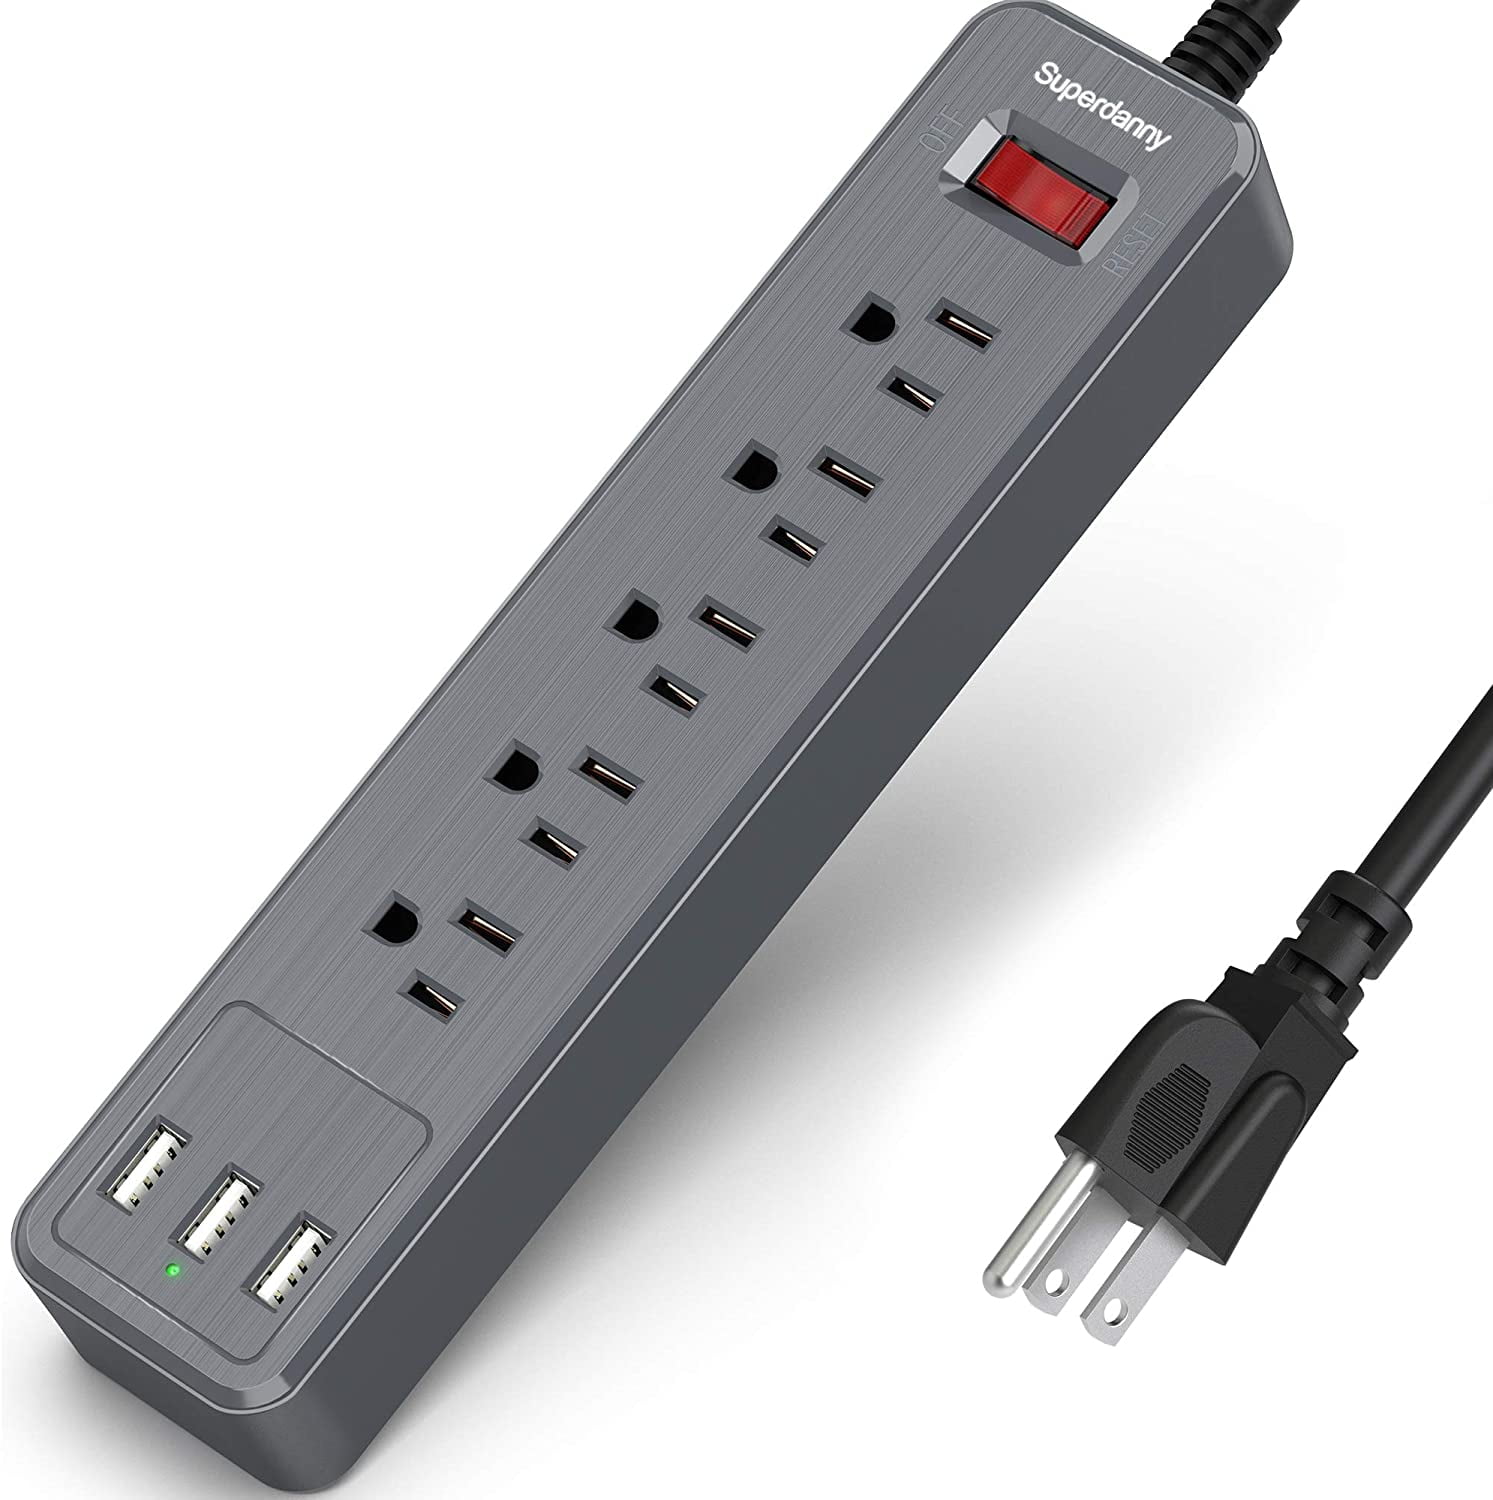 SUPERDANNY Flat Plug 9.8ft 14AWG Extension ... 15A Surge Protector Power Strip